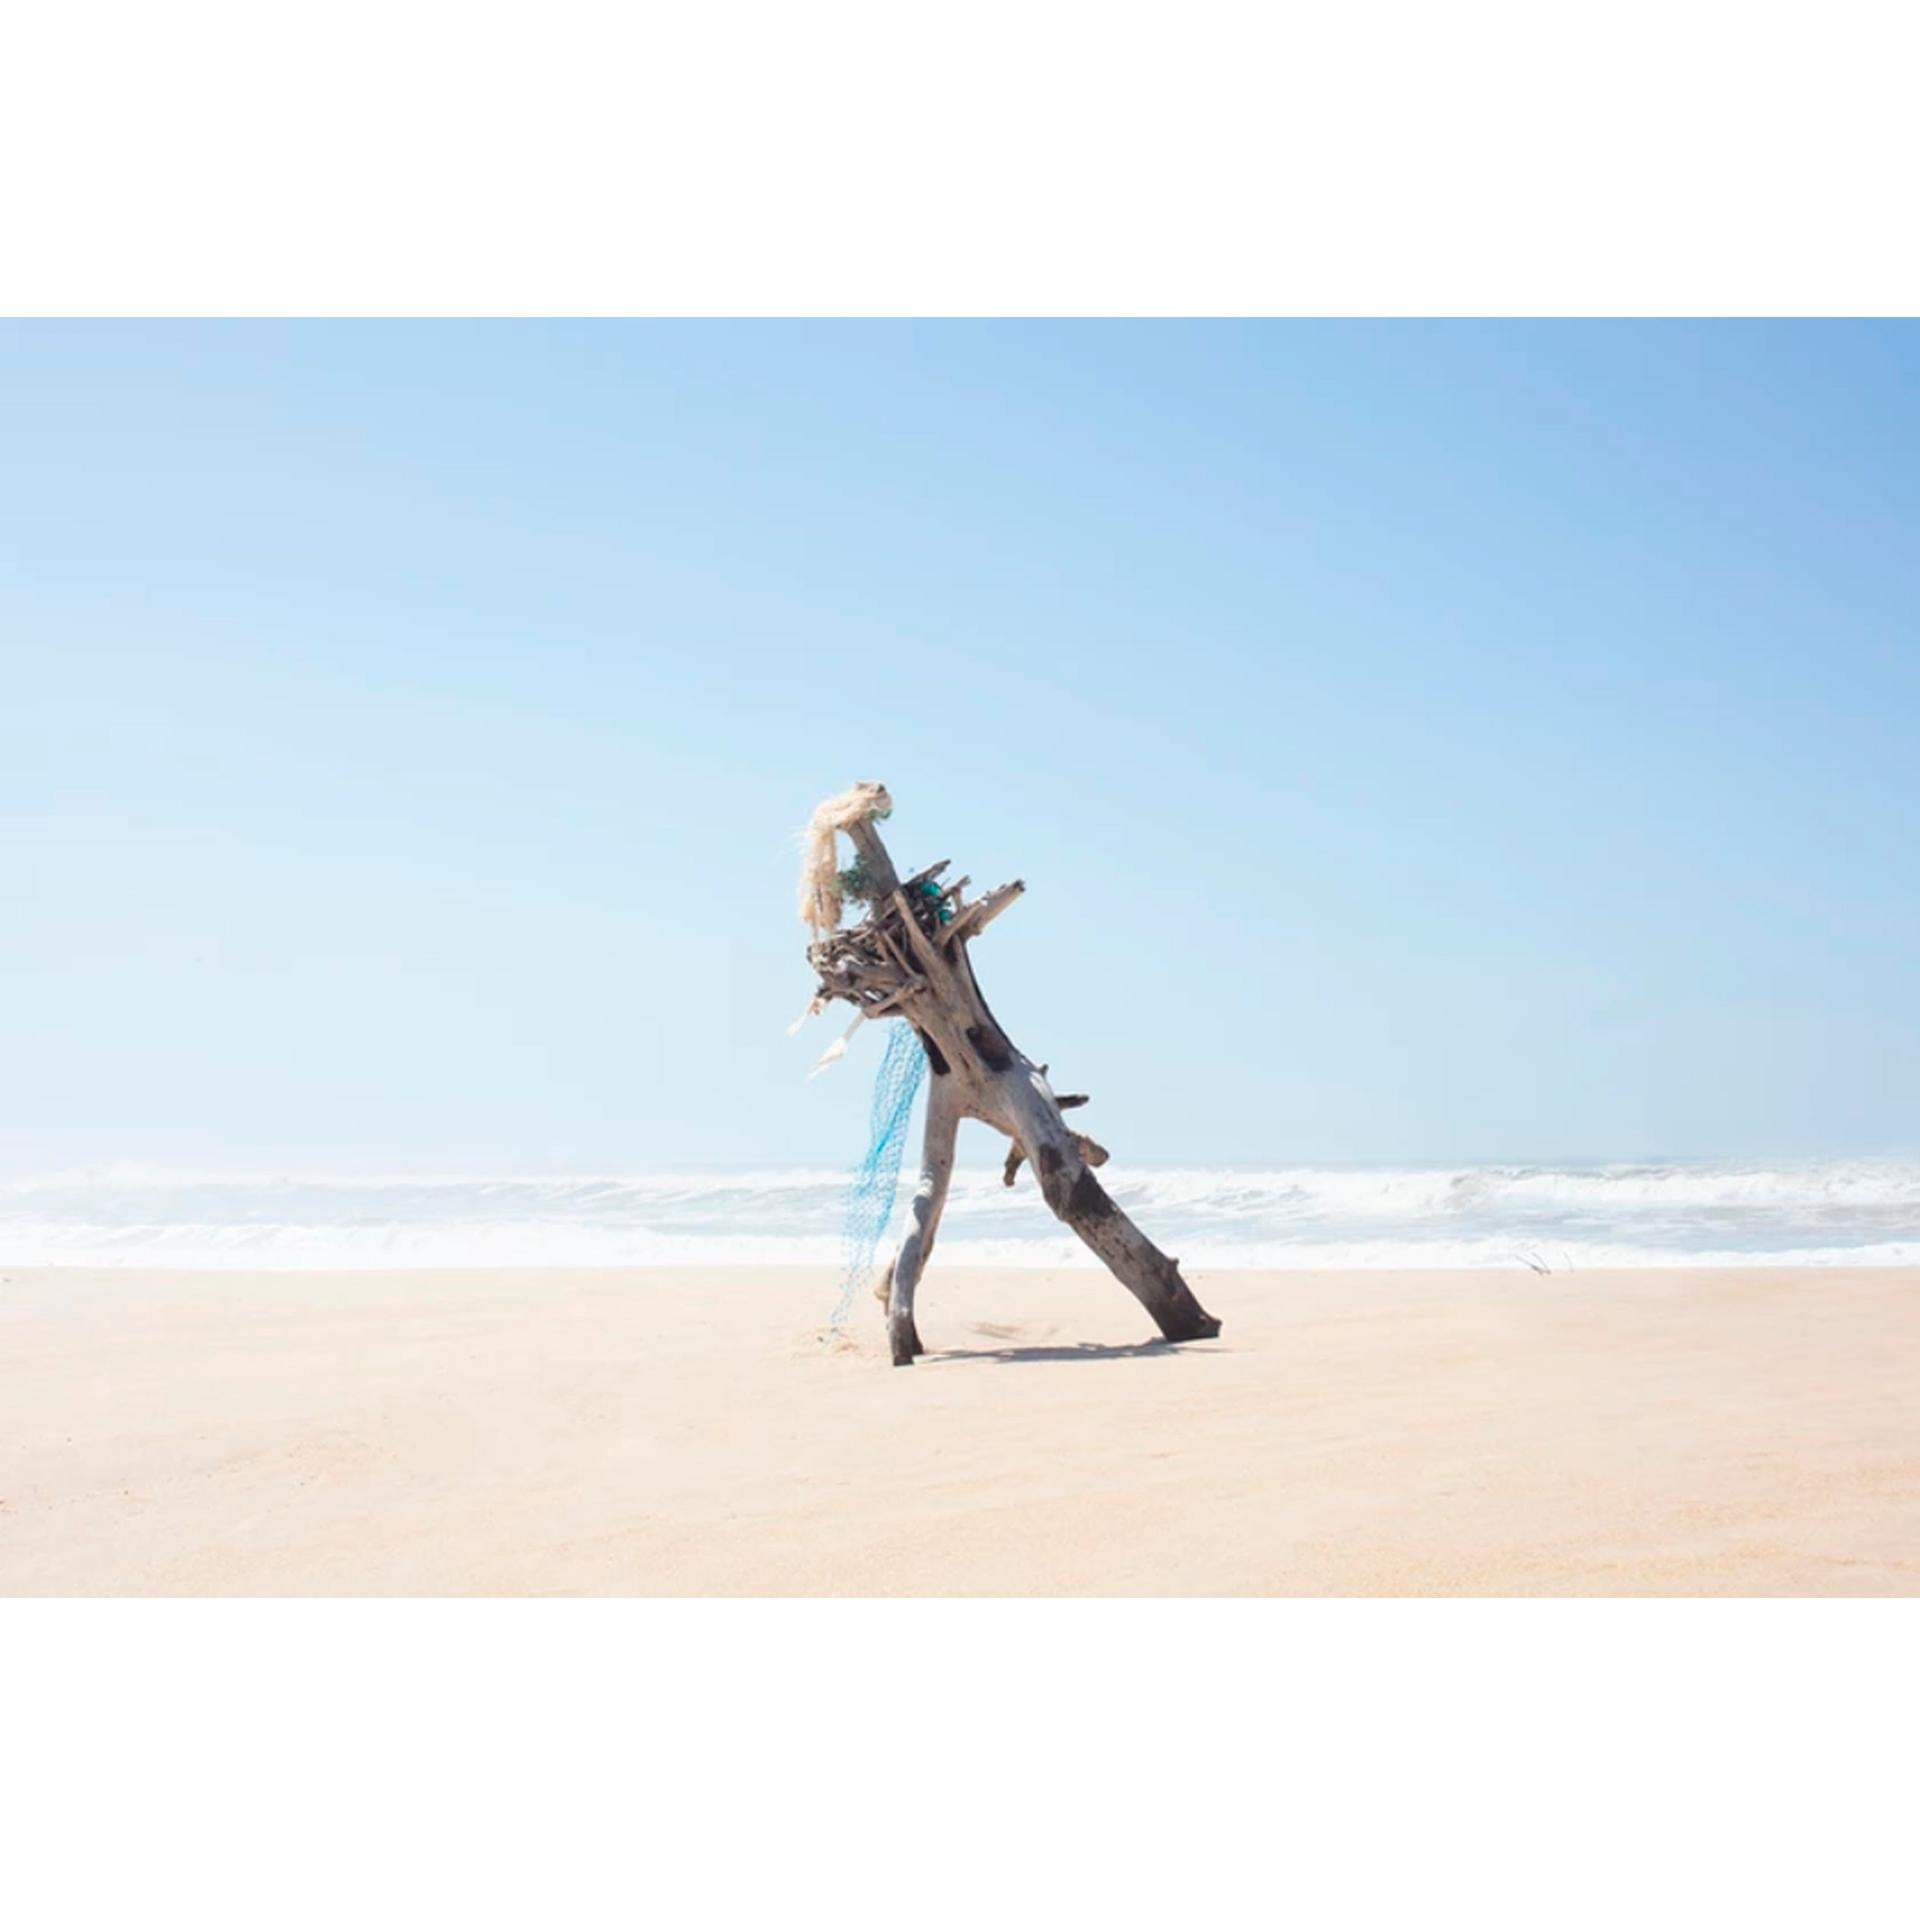 Serie Khamekaye
Paula Anta
Photography

Edition of 5

The Khamekaye series was executed in the Grande-Côte, a 150 km-long stretch of Senegal’s coastline between the northern outskirts of Dakar and the River Senegal estuary. Every now and then on